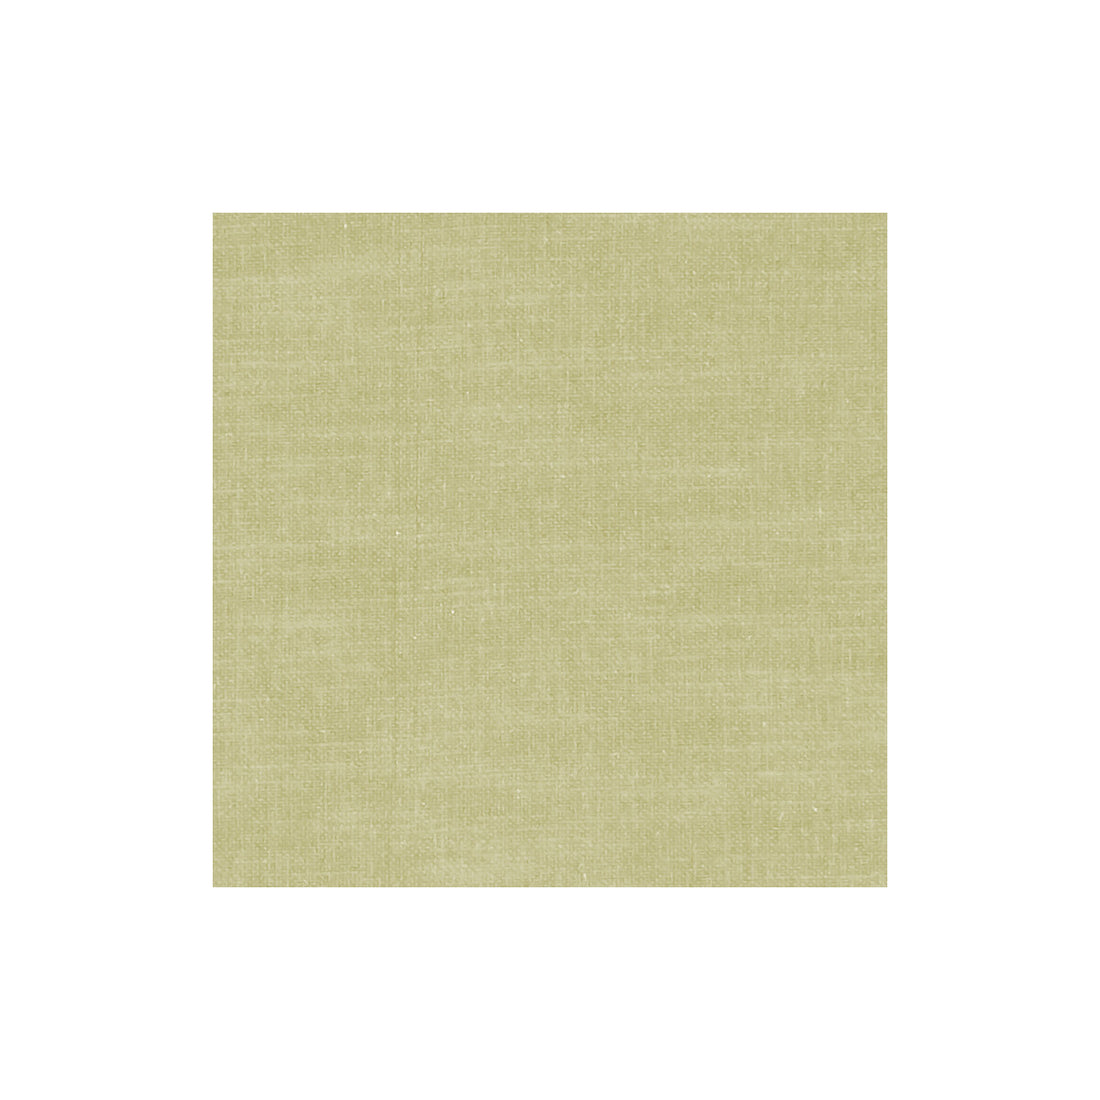 Amalfi fabric in hemp color - pattern F1239/29.CAC.0 - by Clarke And Clarke in the Clarke &amp; Clarke Amalfi collection